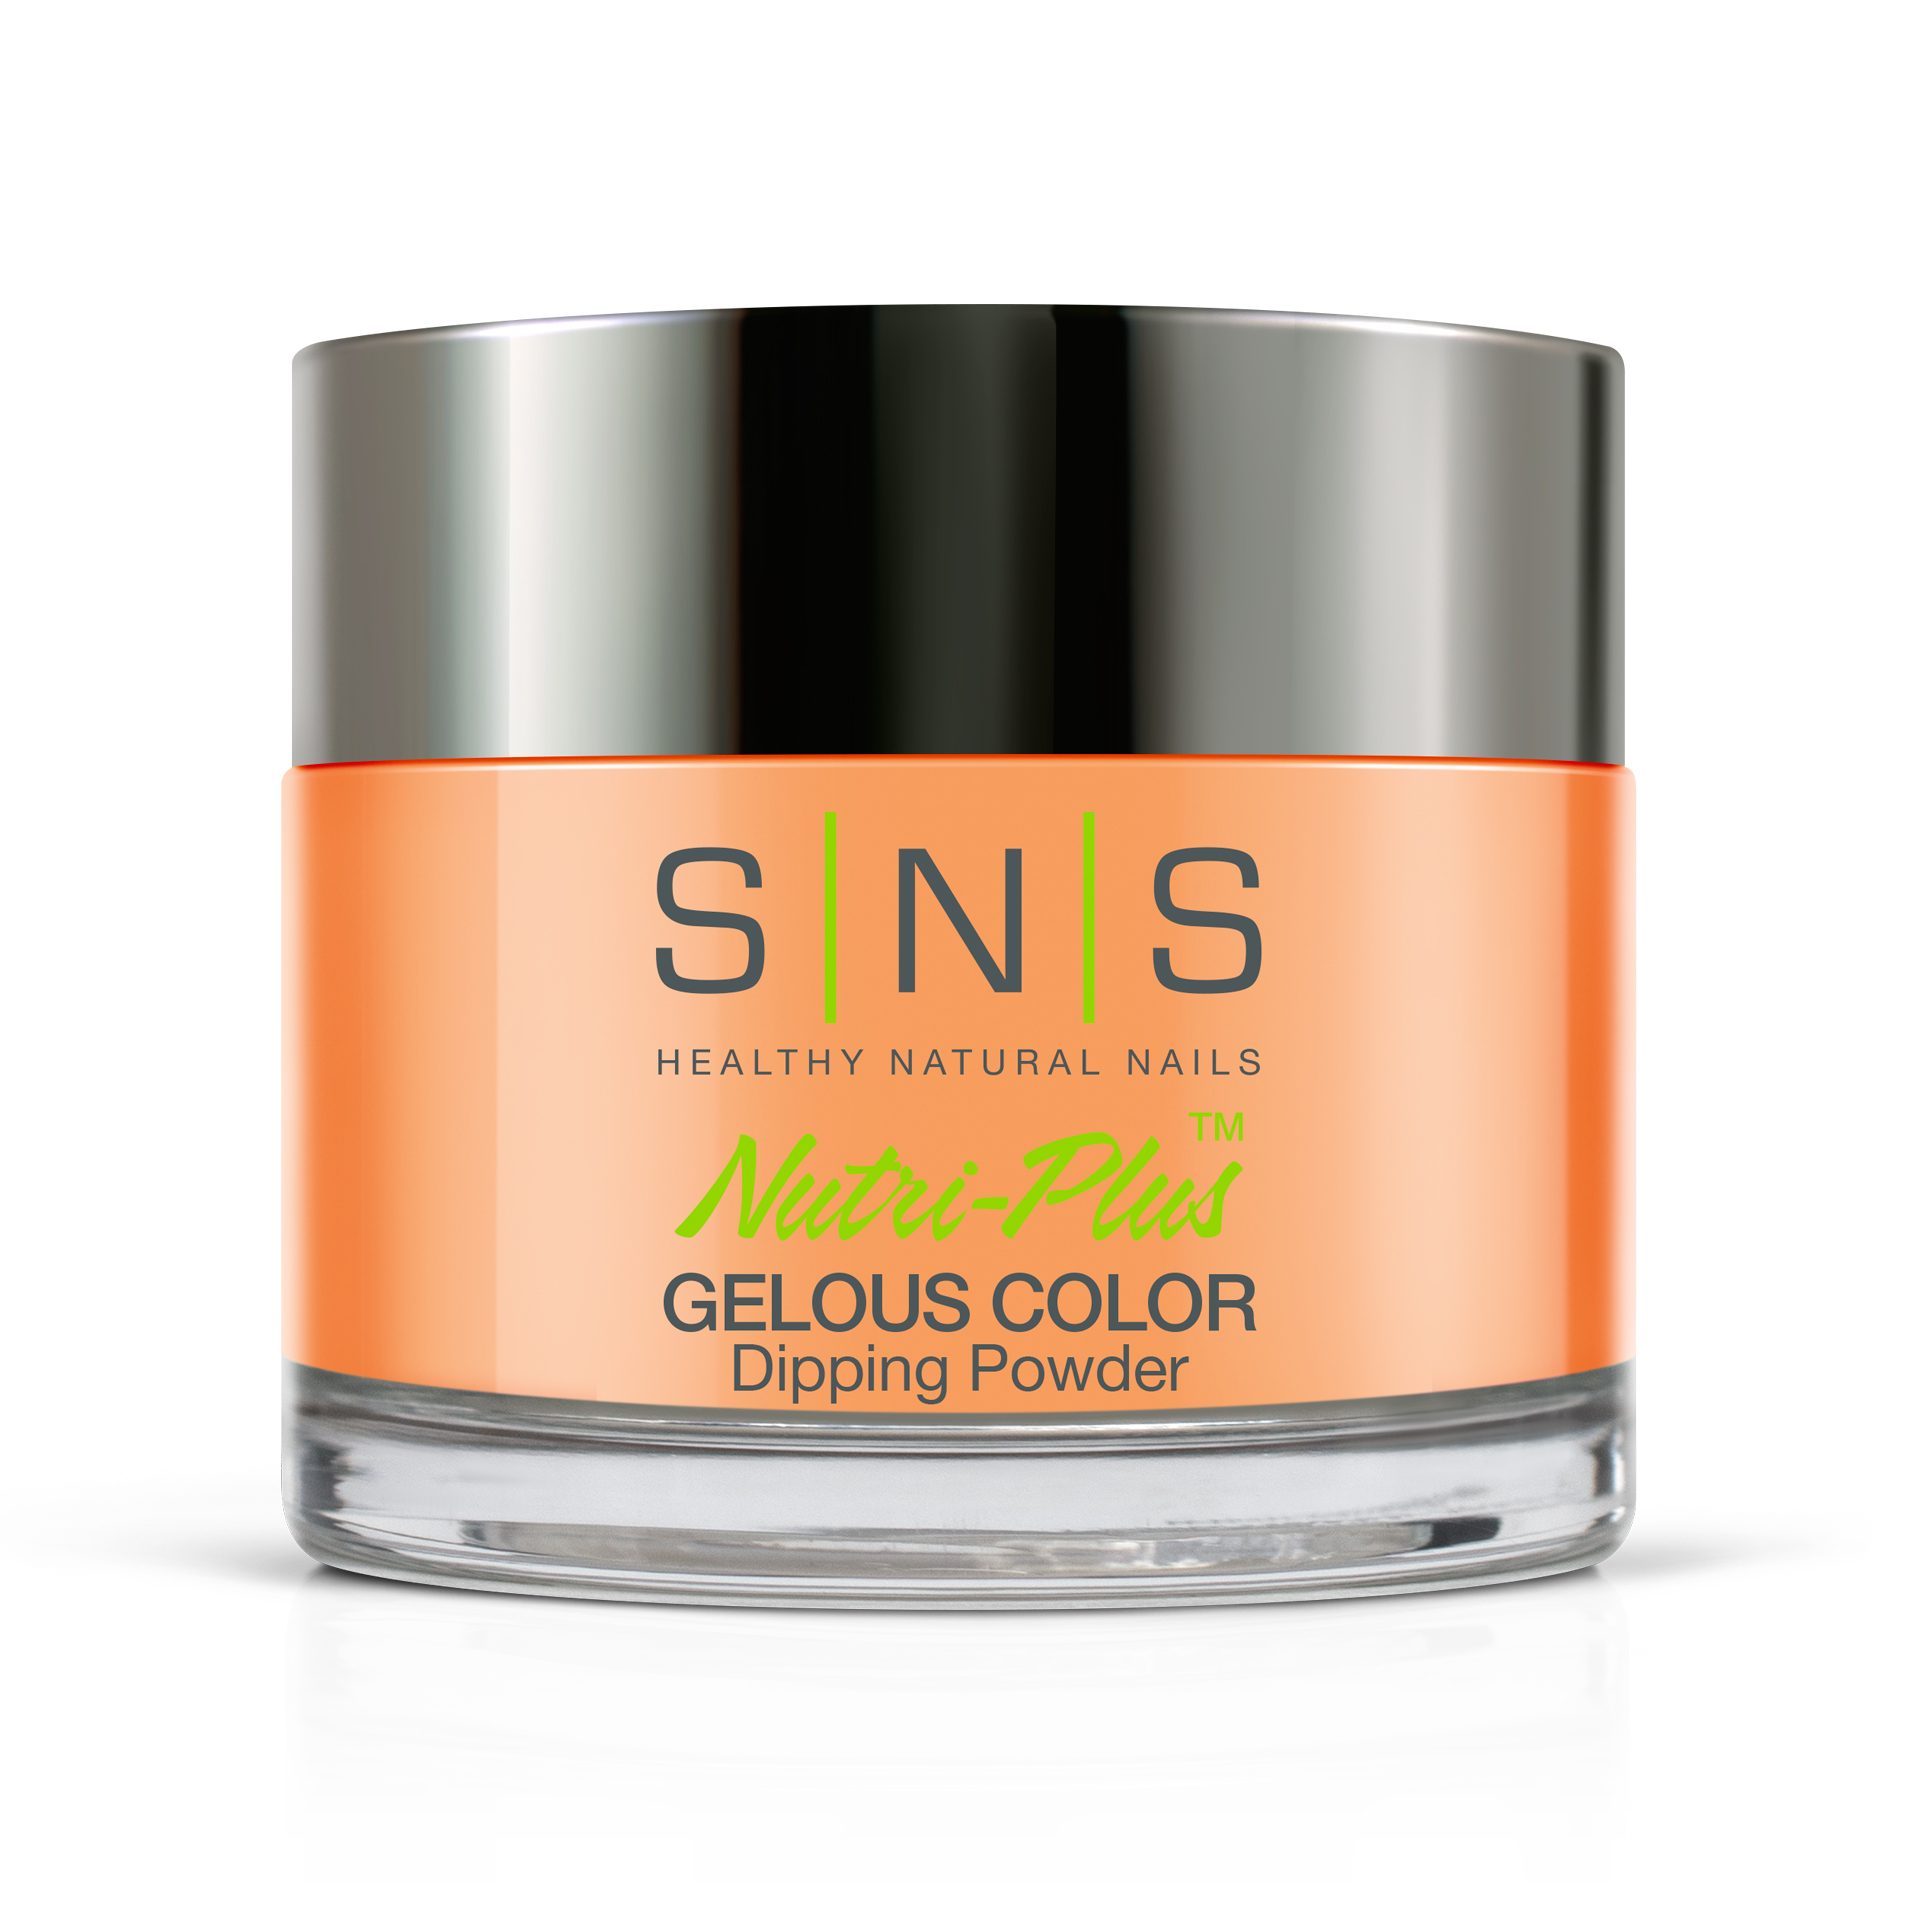 SNS Nails # 35 My Kind of Melon 28g (1oz) | Gelous Dipping Powder